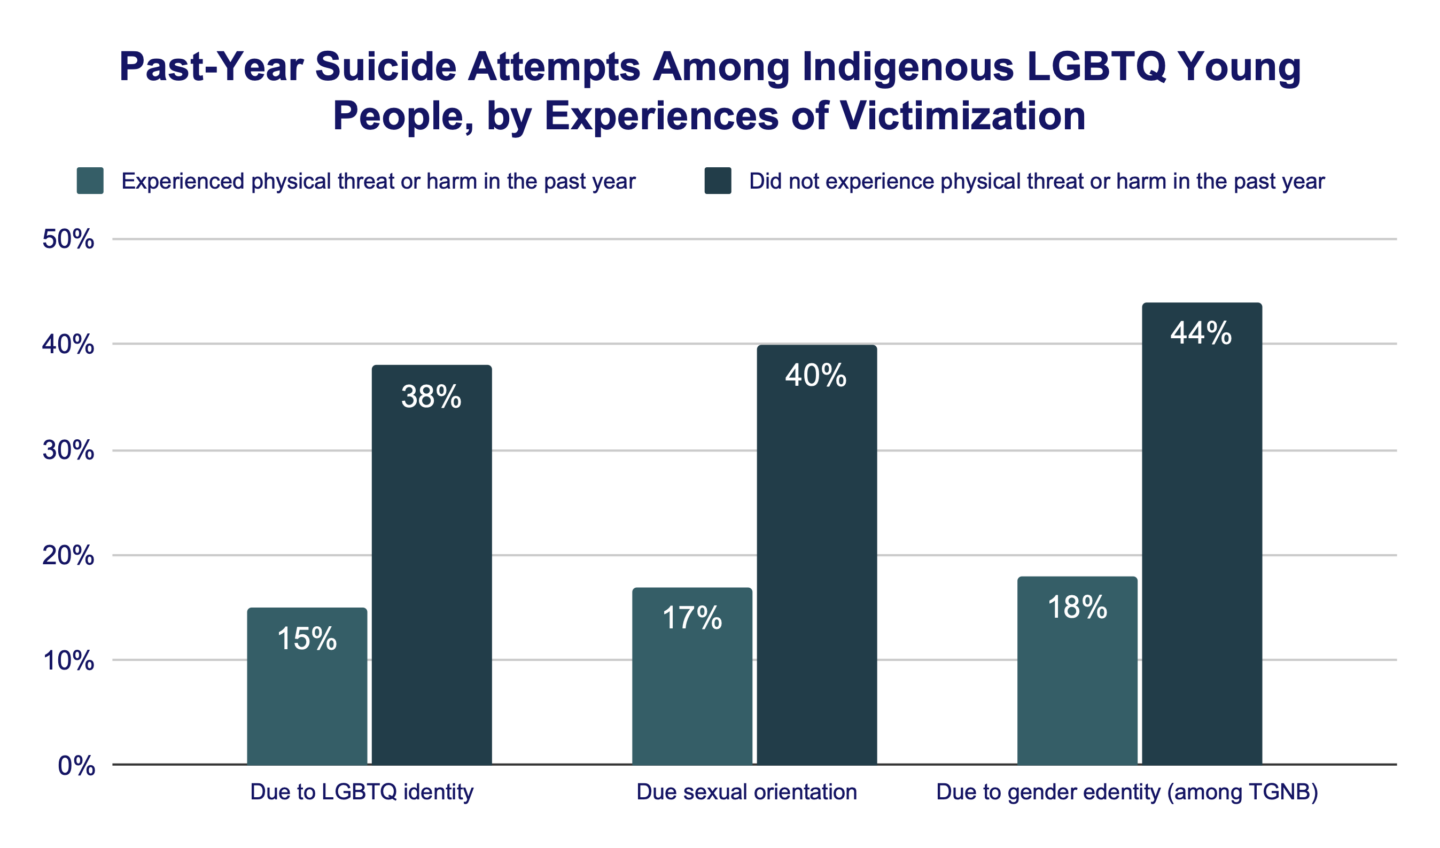 Past-Year Suicide Attempts Among Indigenous LGBTQ Young People, by Experiences of Victimization